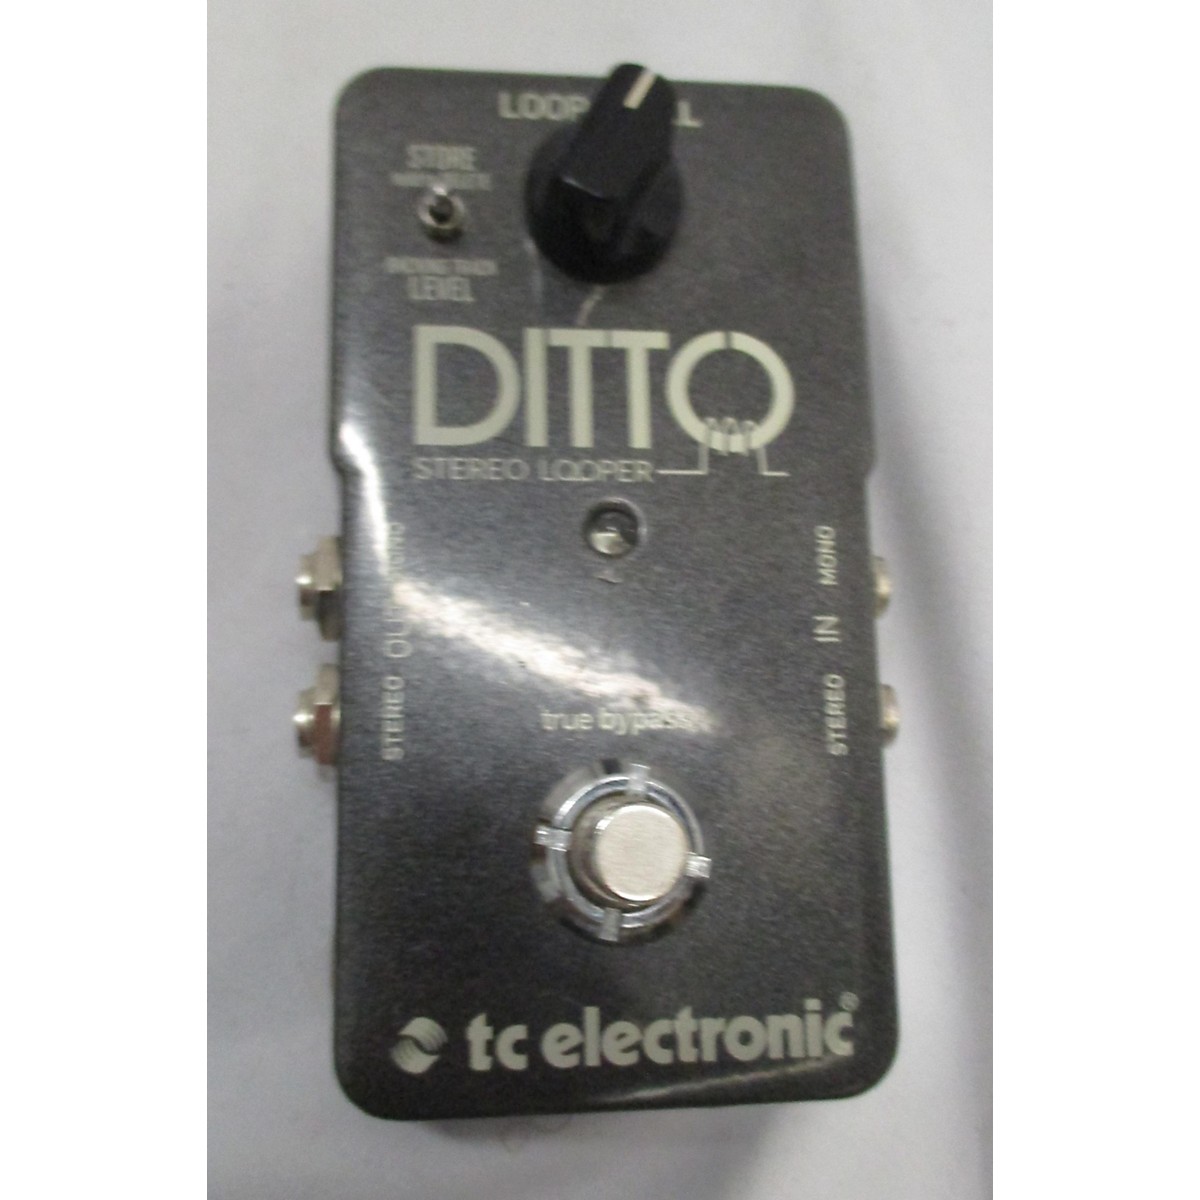 ditto looper pedal